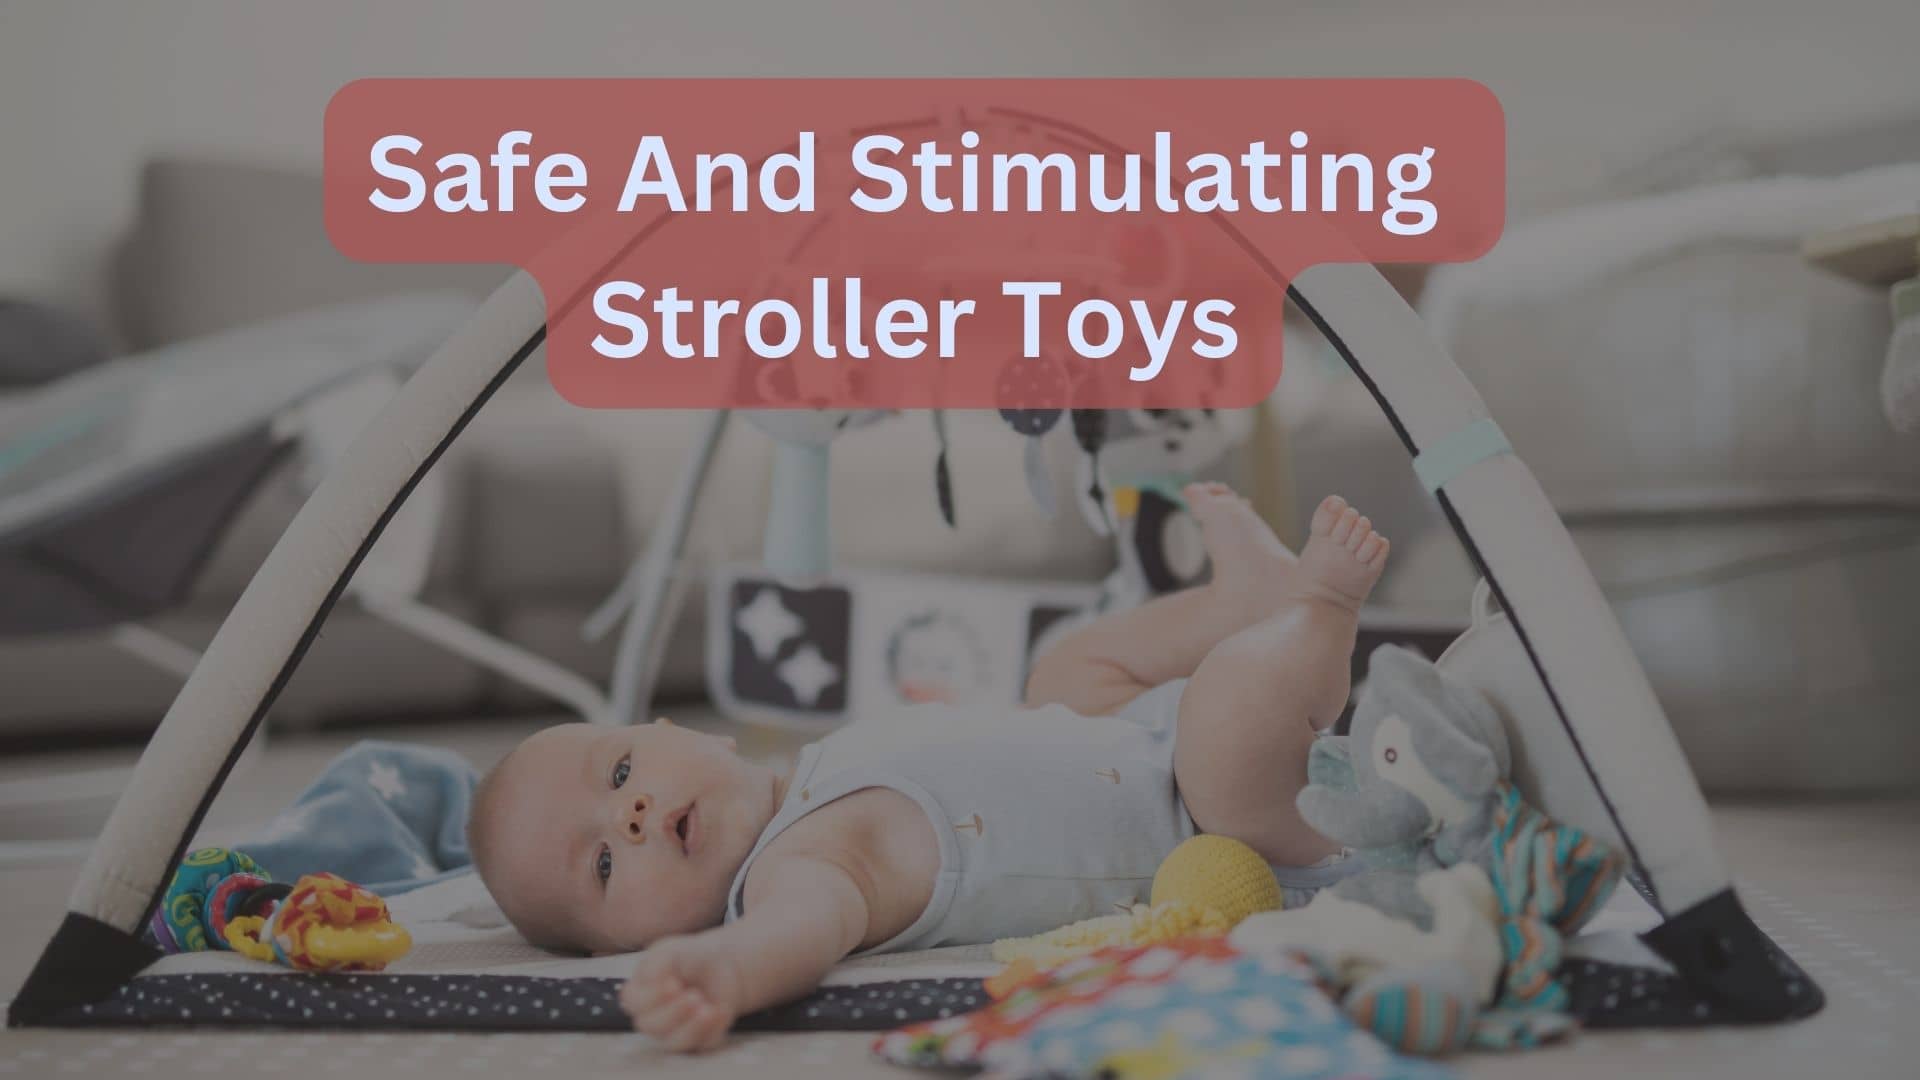 How To Select Safe And Stimulating Stroller Toys?